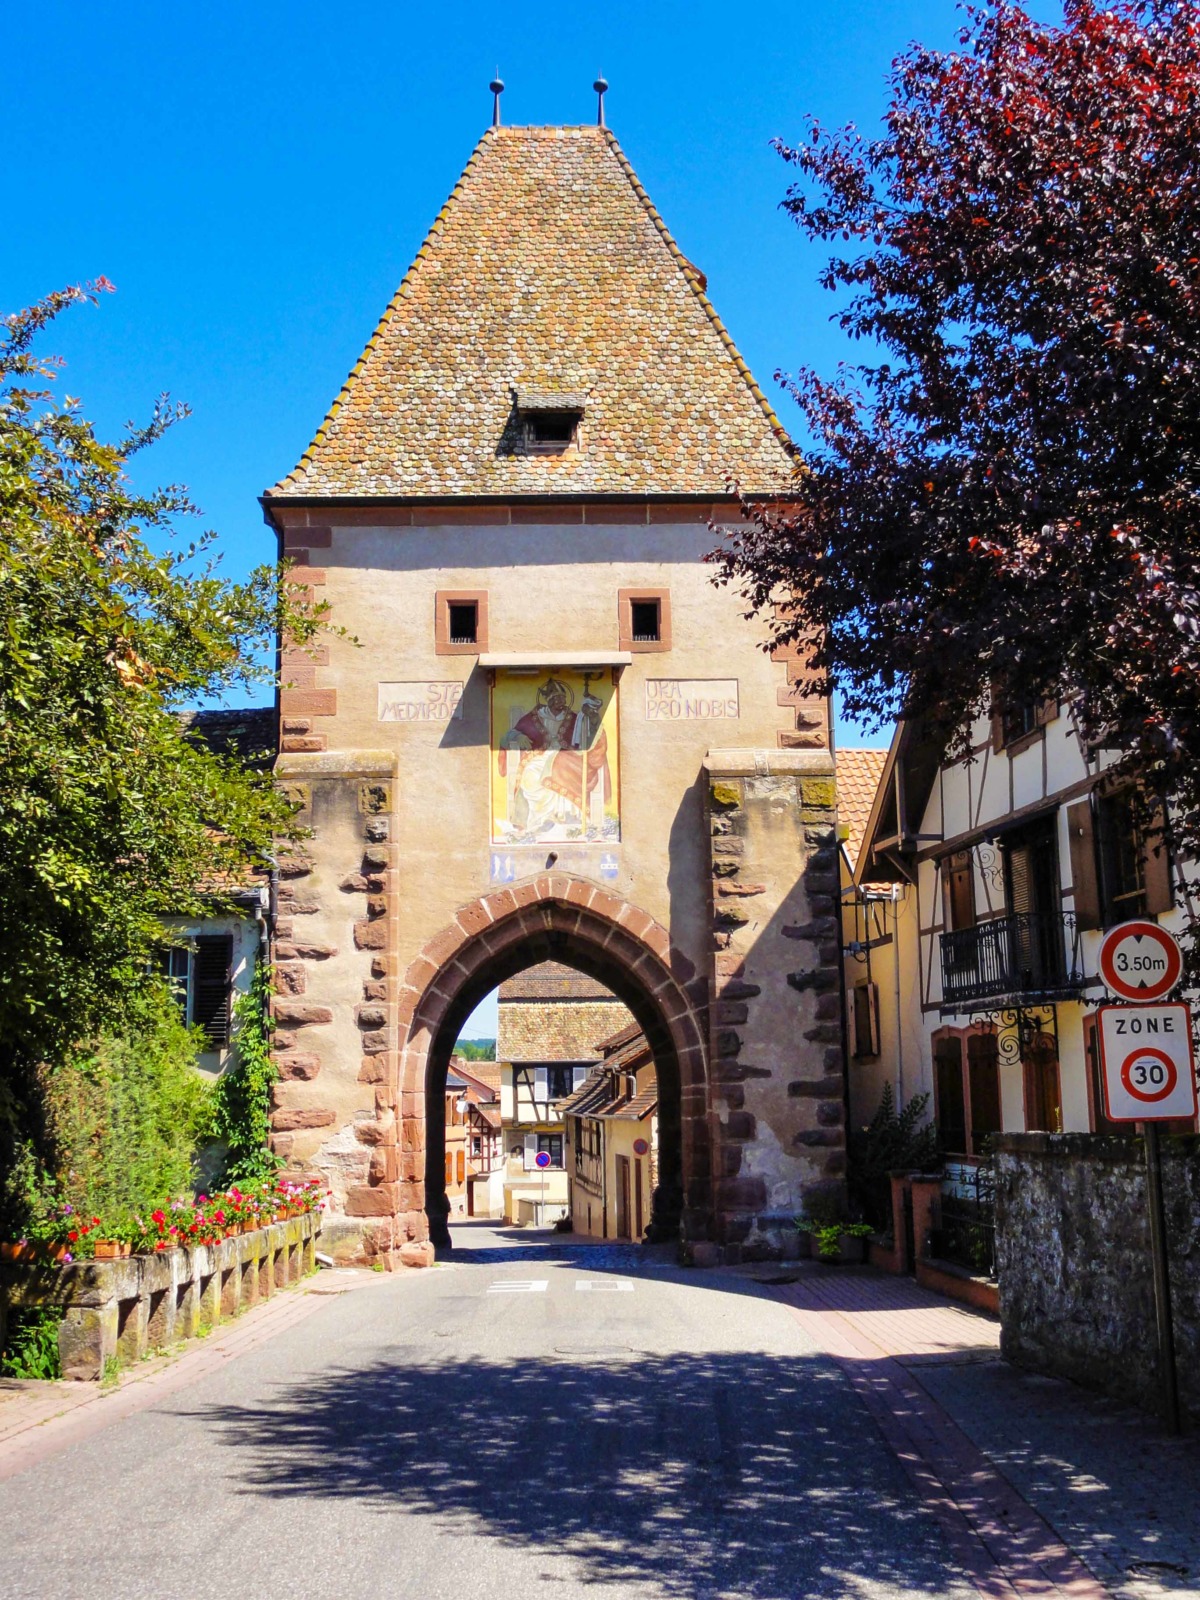 Fortified City Gates of Alsace - Porte Haute, Bœrsch © Ralph Hammann - licence [CC BY-SA 4.0] from Wikimedia Commons